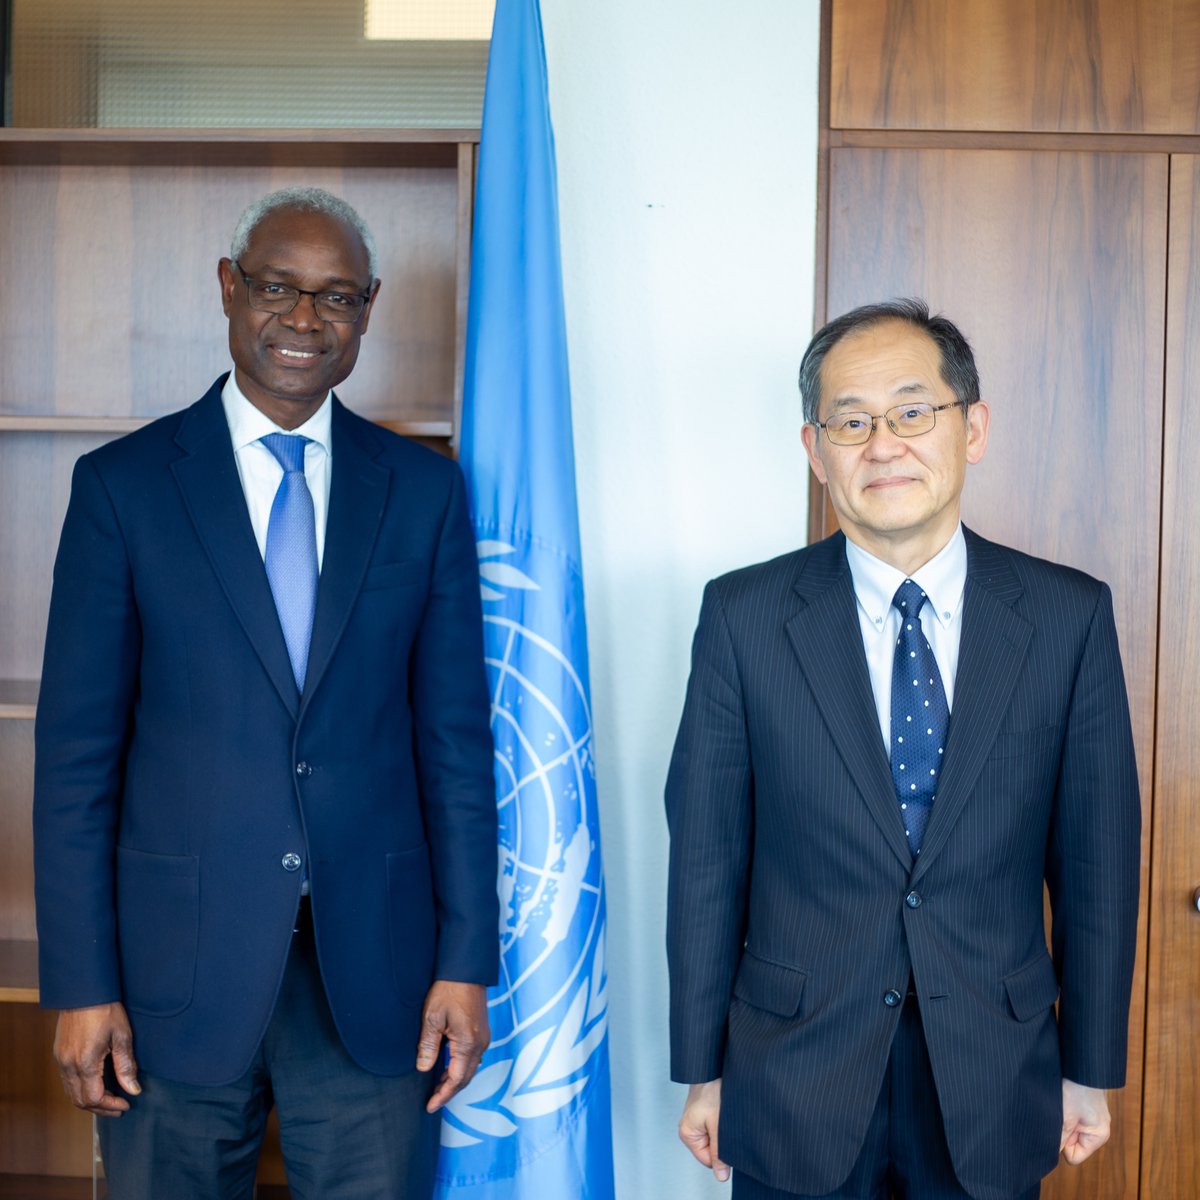 Thrilled to welcome H.E. Hidenao Yanagi,@Amb_Japan
#Japan's Ambassador to Germany, here at the UNCCD HQ in Bonn. Productive talks on strengthening ties and gearing up for #UNCCDCOP16. Together, we're amplifying our commitment to global land restoration efforts. #UNited4Land